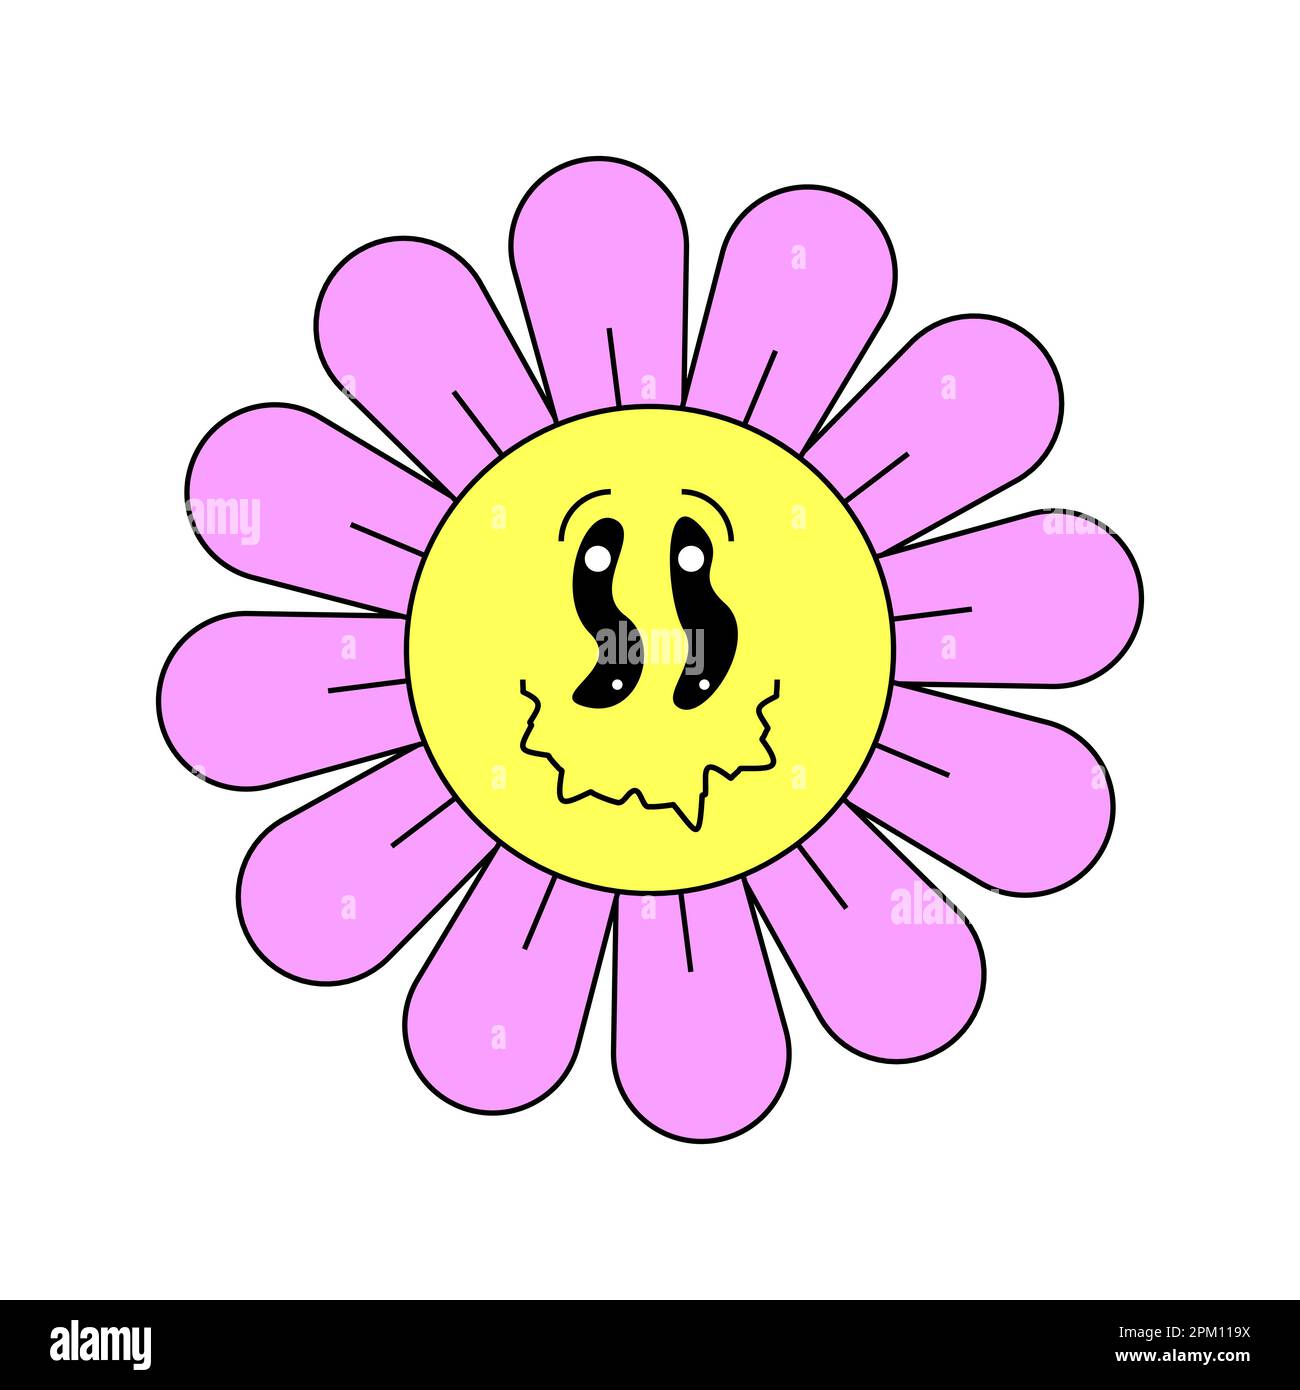 Hippie groovy chamomile smiley strange character good vibes. Retro daisy flower head crazy mascot melting face. Psychedelic positive nostalgic vintage cartoon plant. Trendy y2y pop culture floral. EPS Stock Vector